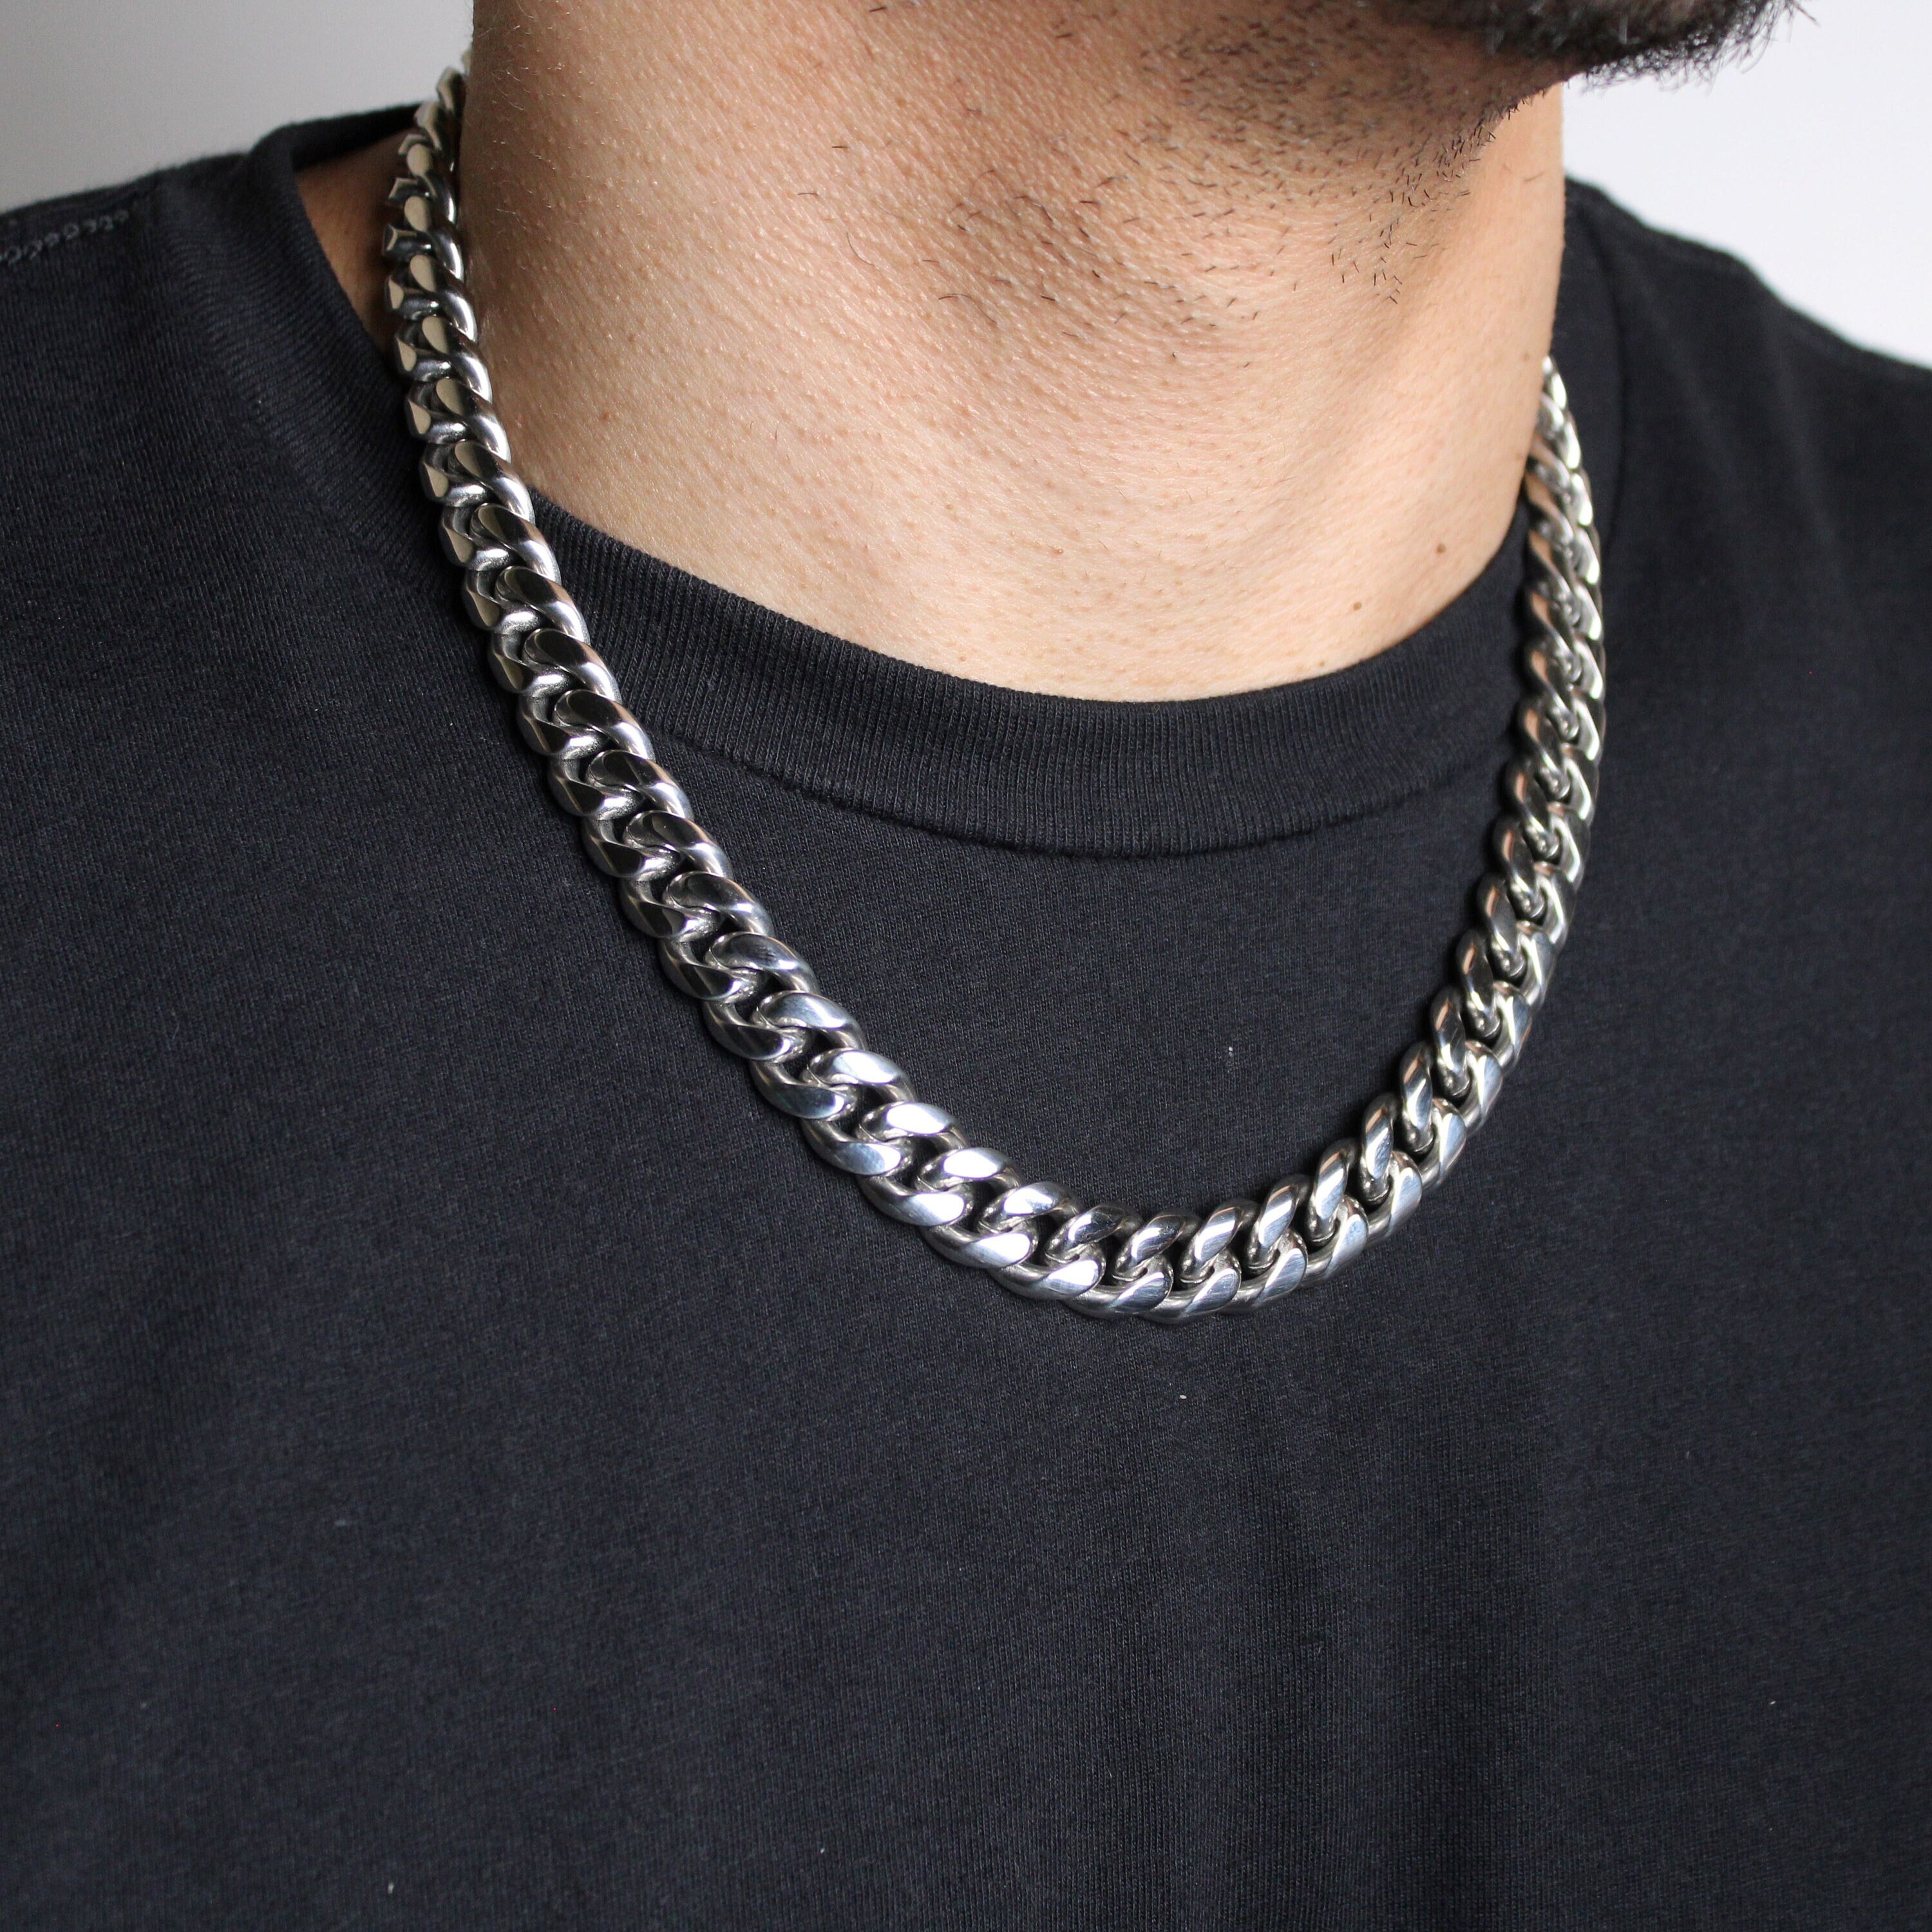 Fine Stainless Steel Chain Necklace, Necklace Chains for Men, Cuban Curb  Link Chain Necklace, 12mm Gold Chain Necklace 18-36 Inches